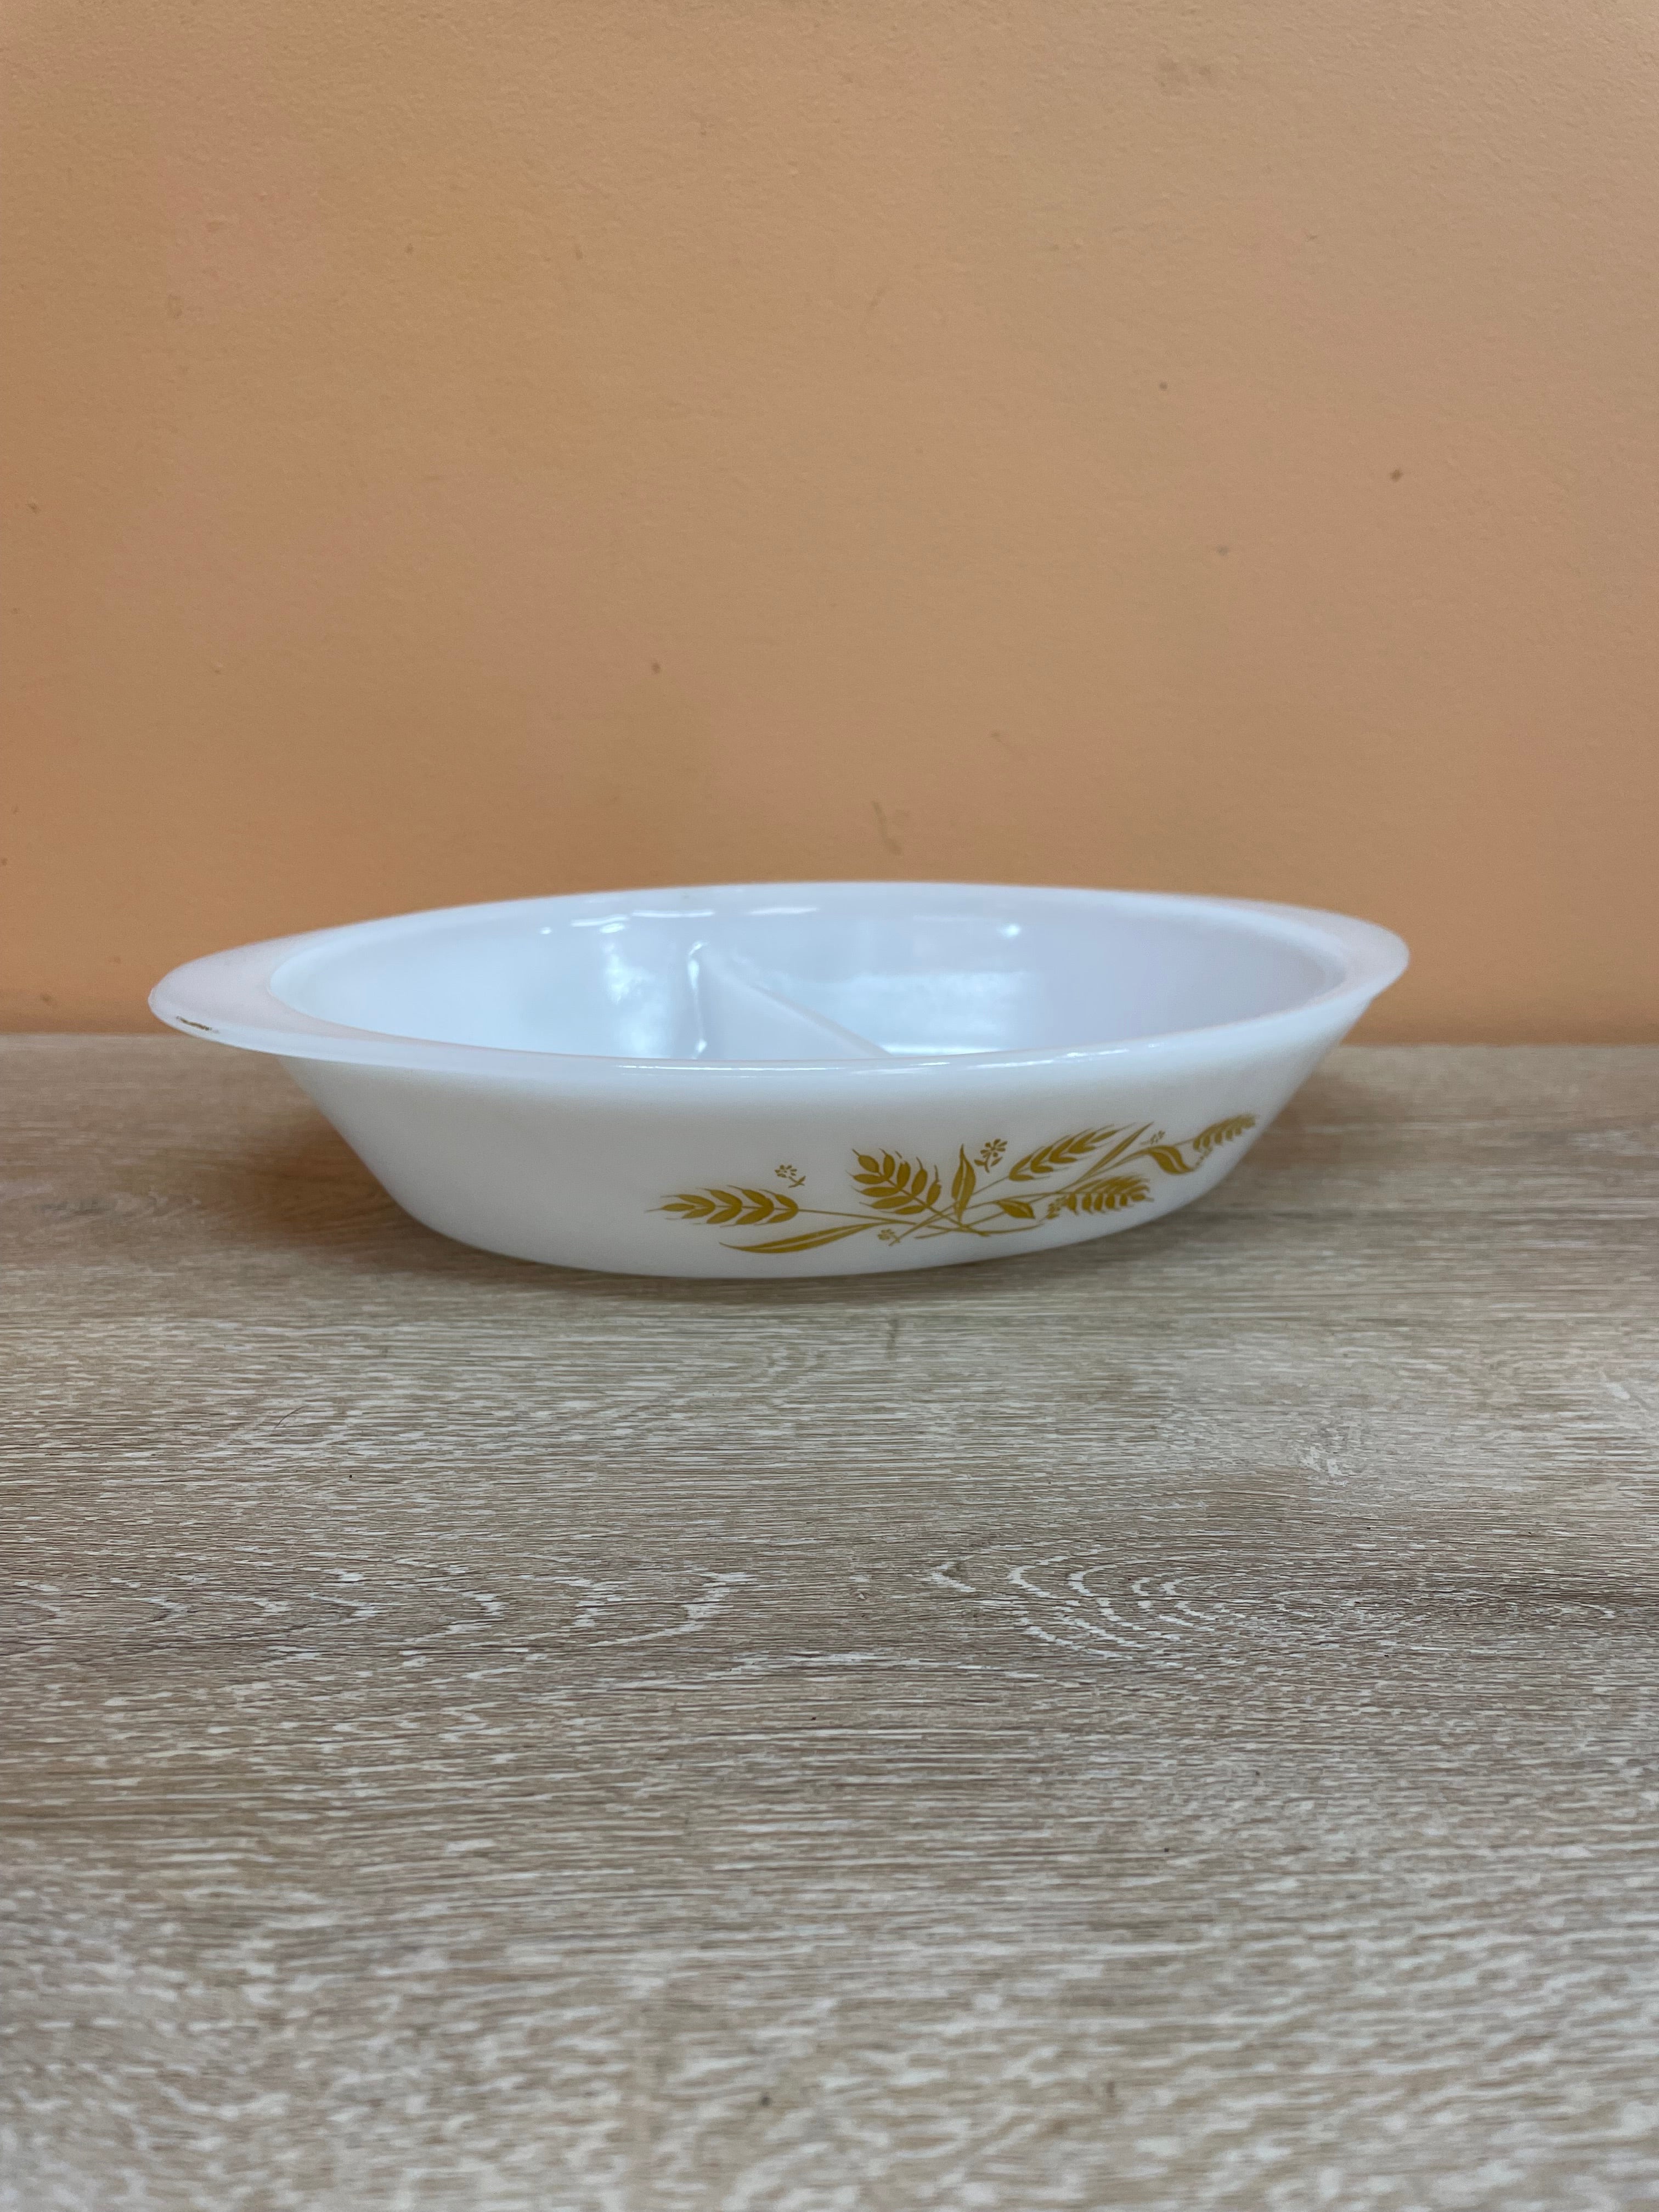 Sears Divided Dish - Wheat Pattern